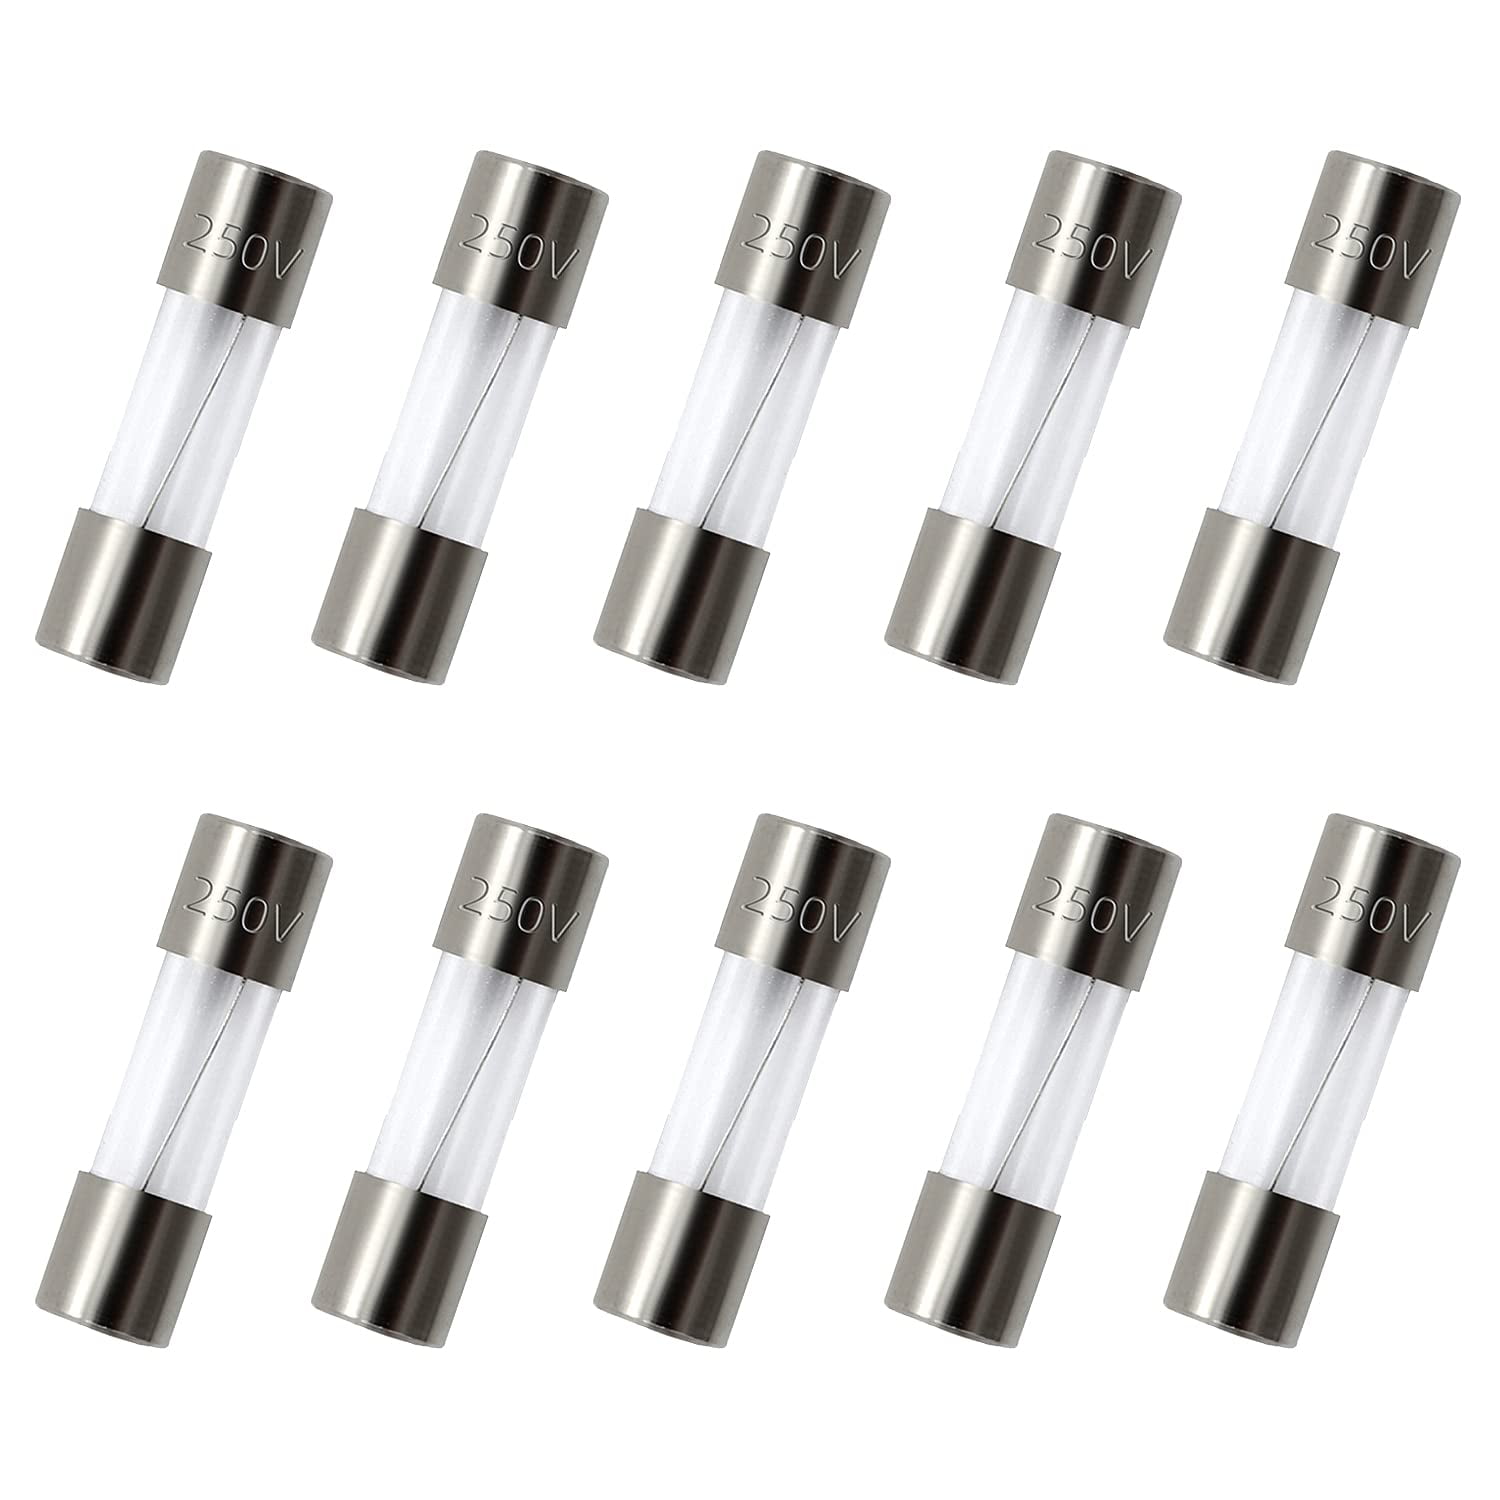 0.5 Amp 0.5A T0.5A 500mA Anti-Surge Fuses x 10 Slow Blow 20mm Glass Fuse 